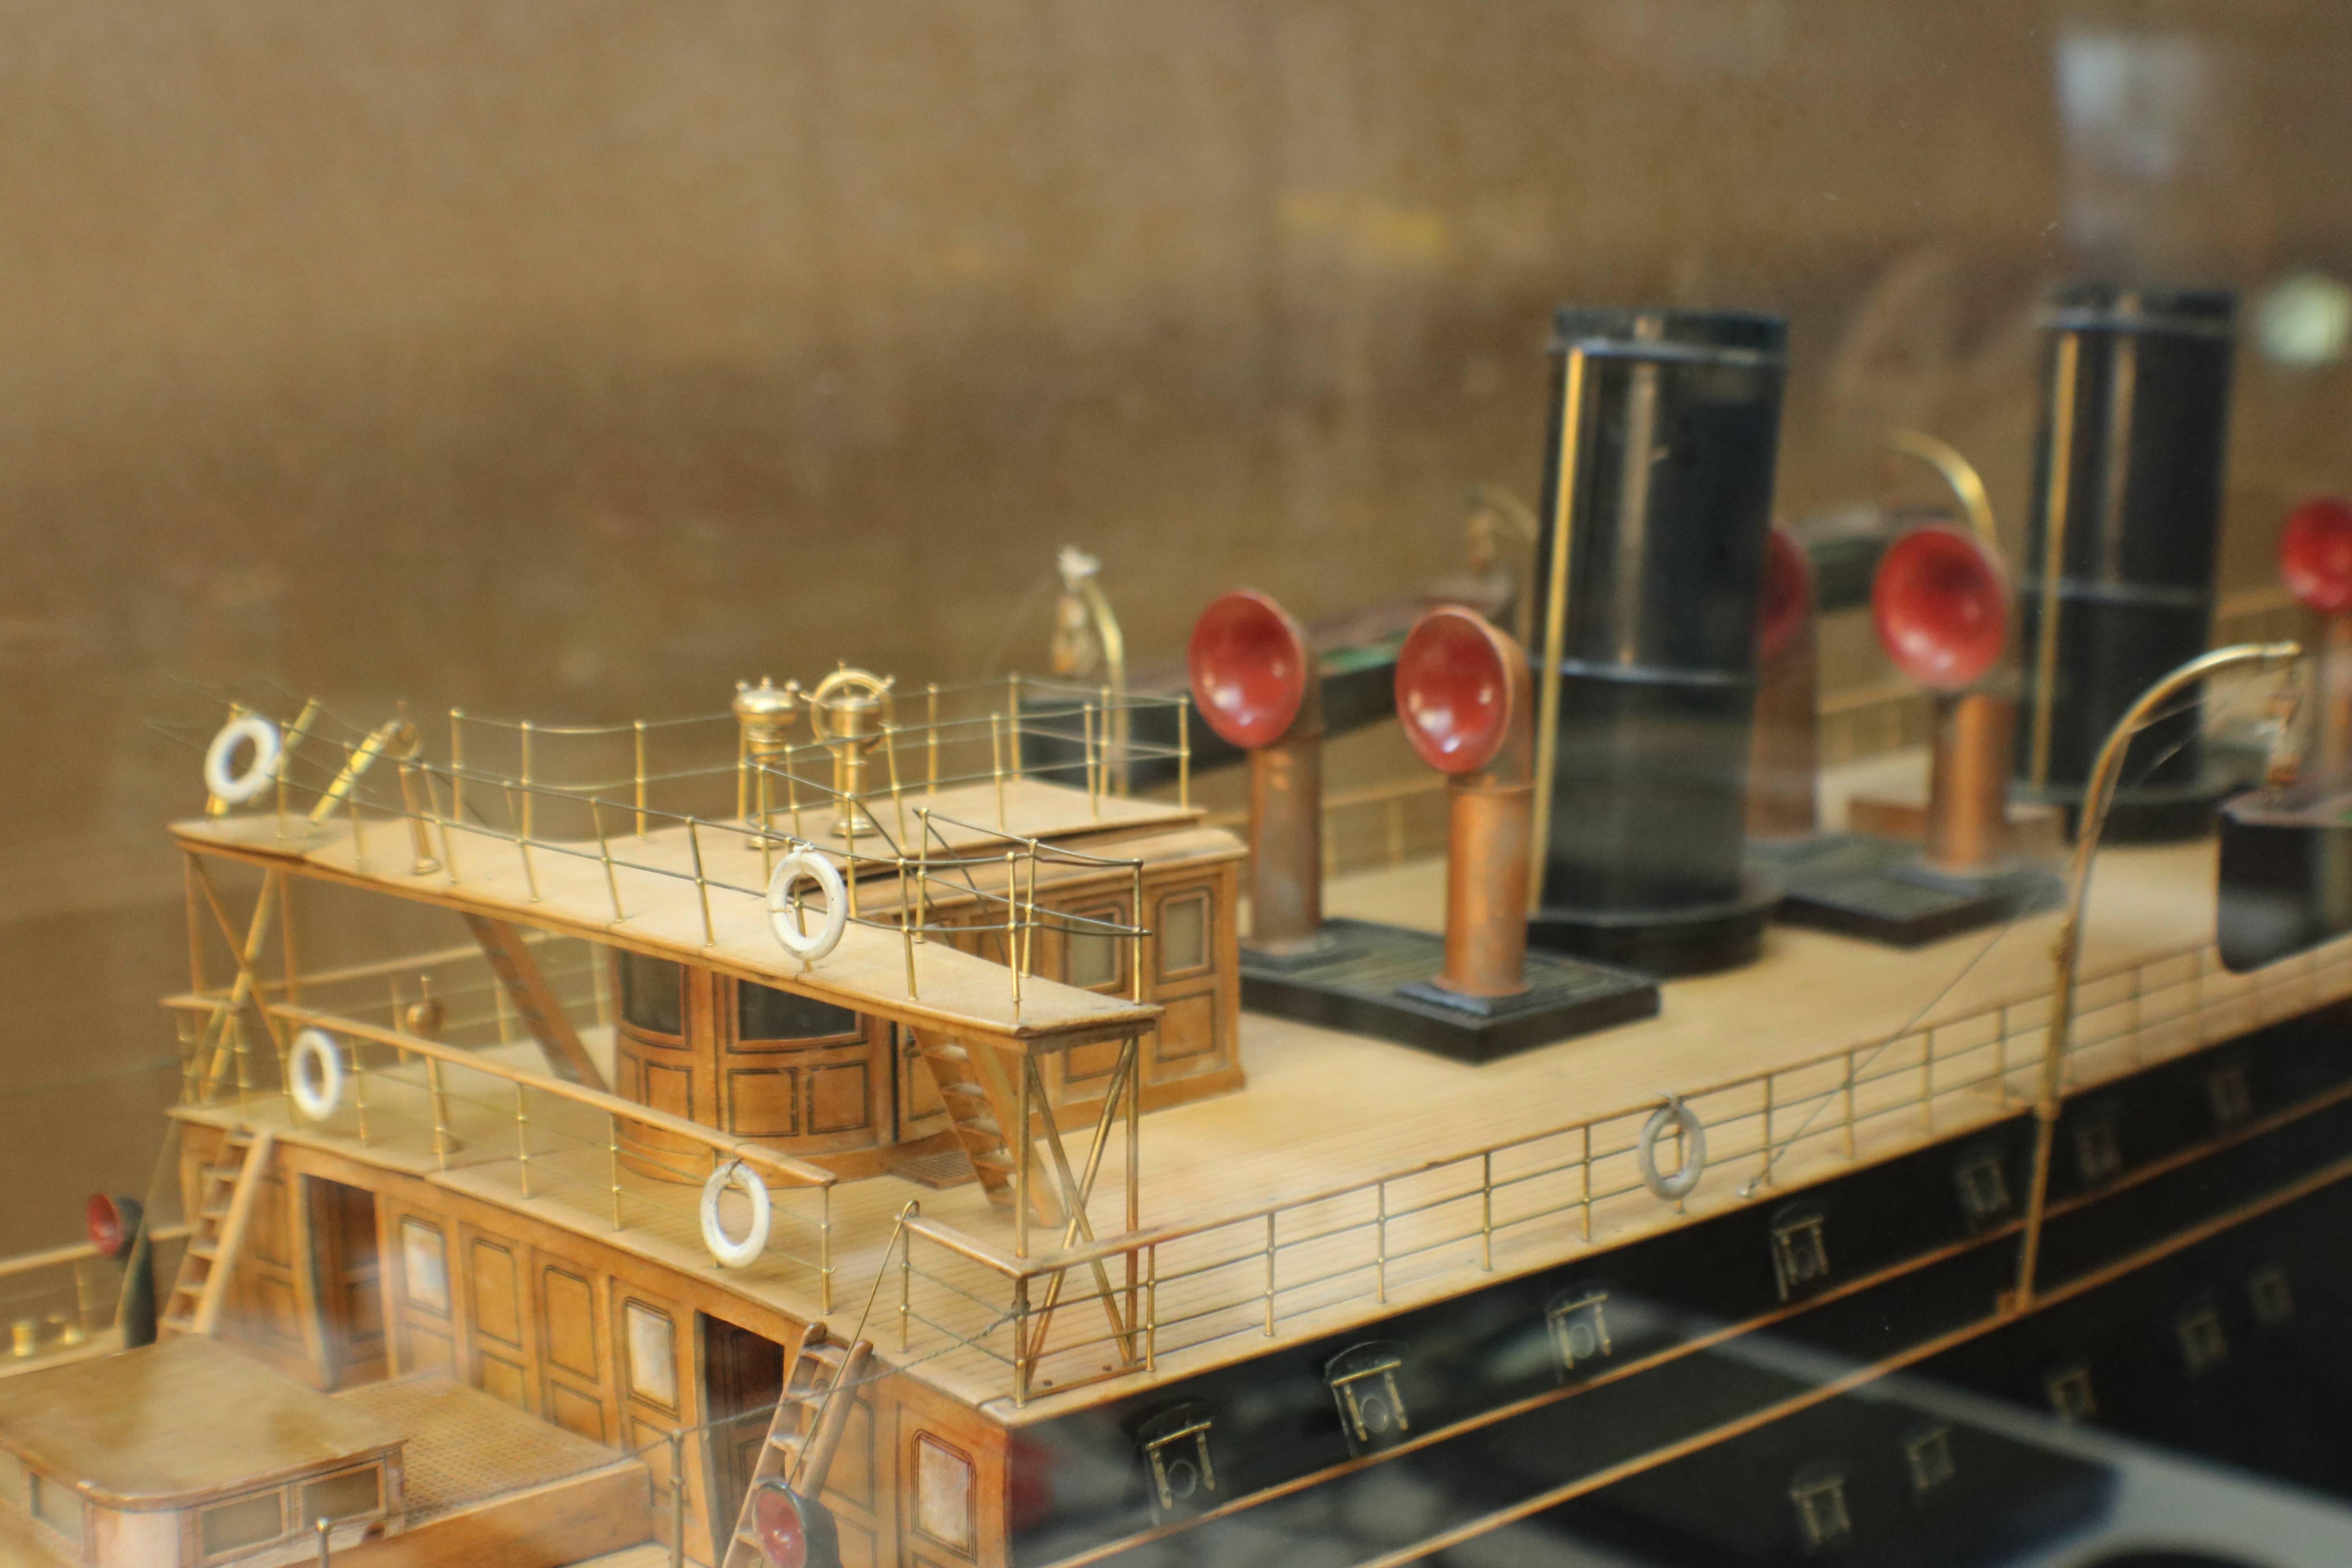 Builder's Model of the P&O Steamship 